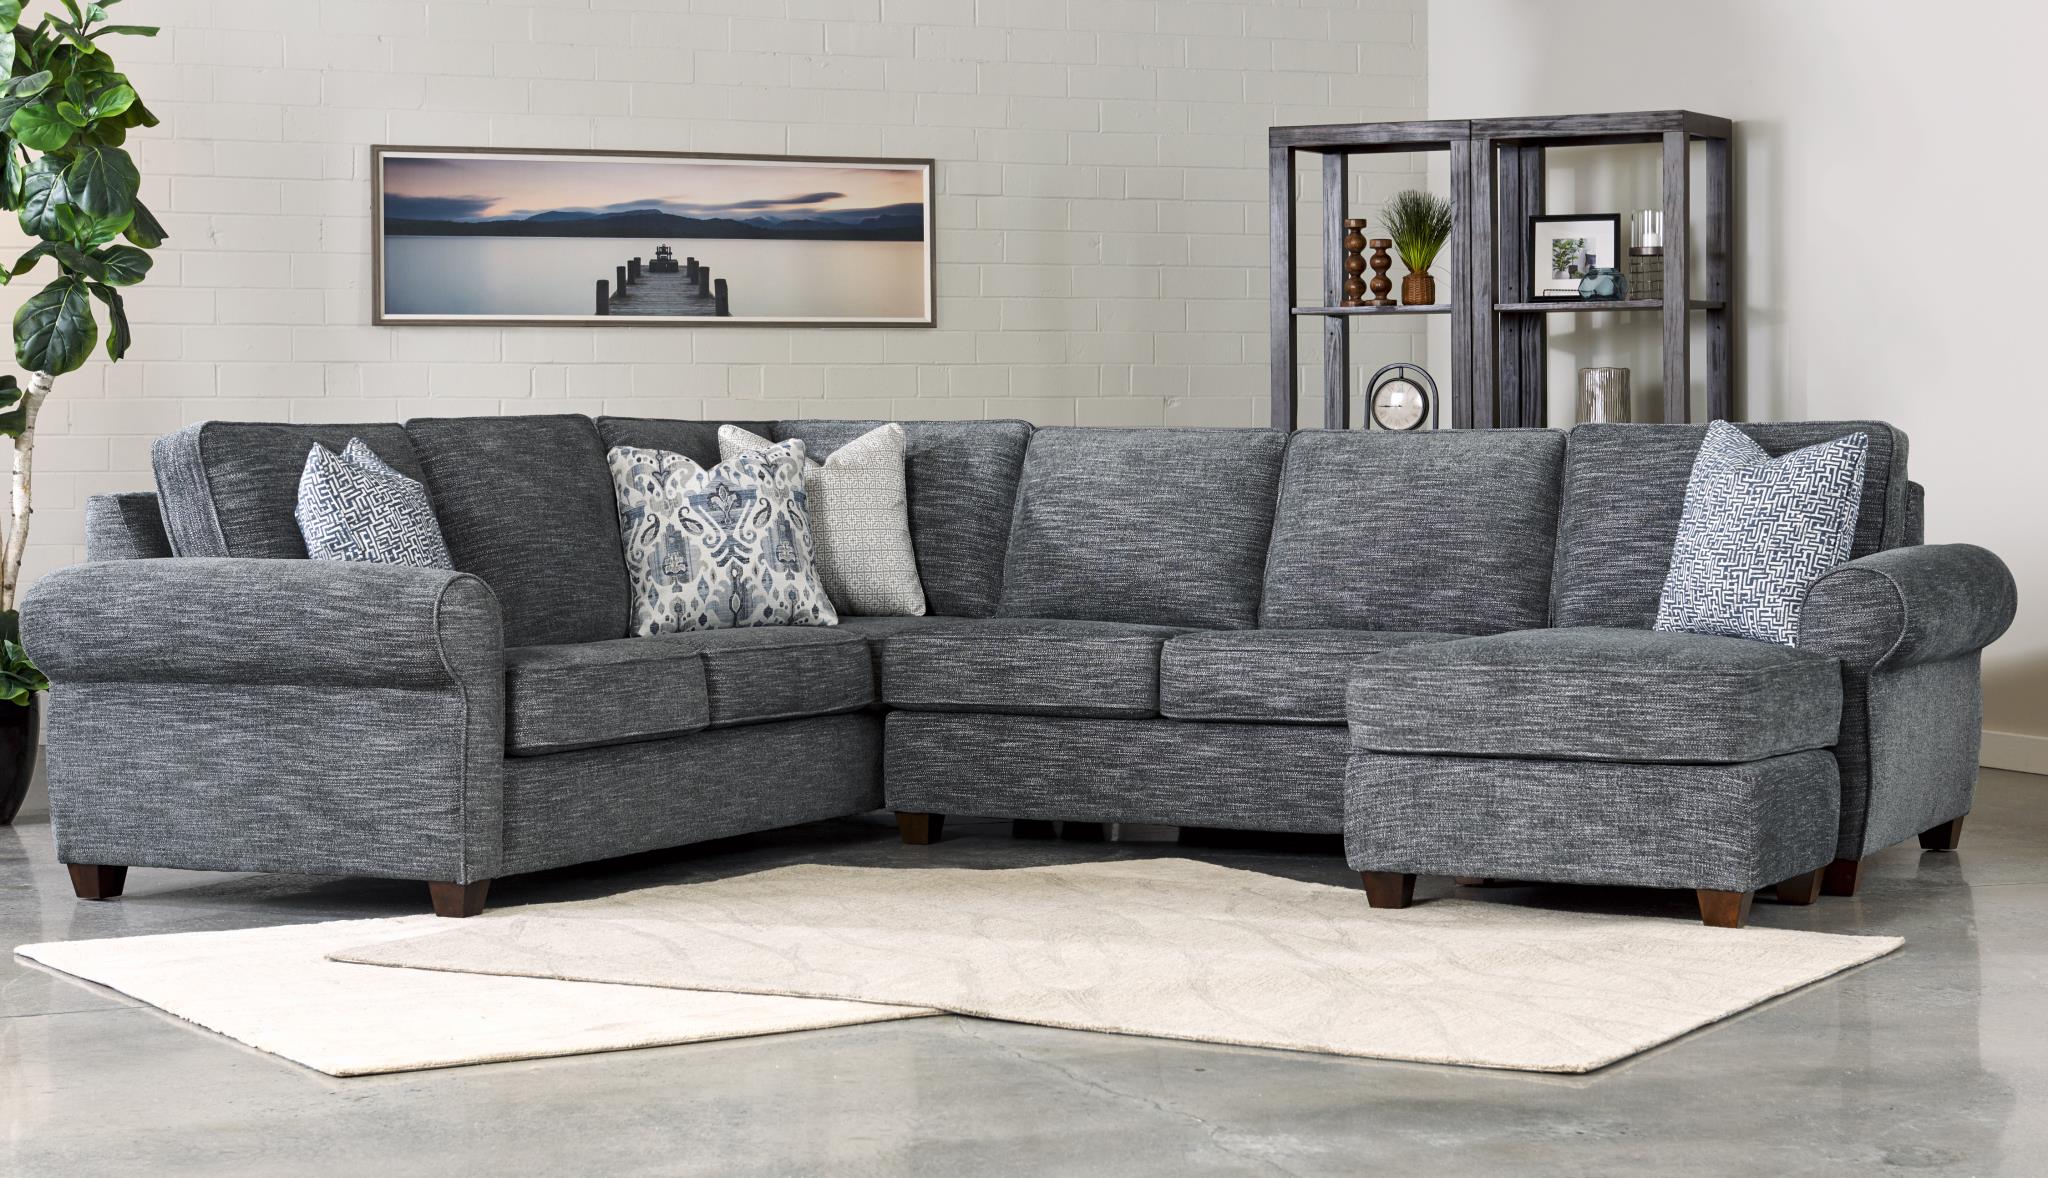 Merrick Sectional Sofa in Hand Woven Slate by Wood House Upholstery